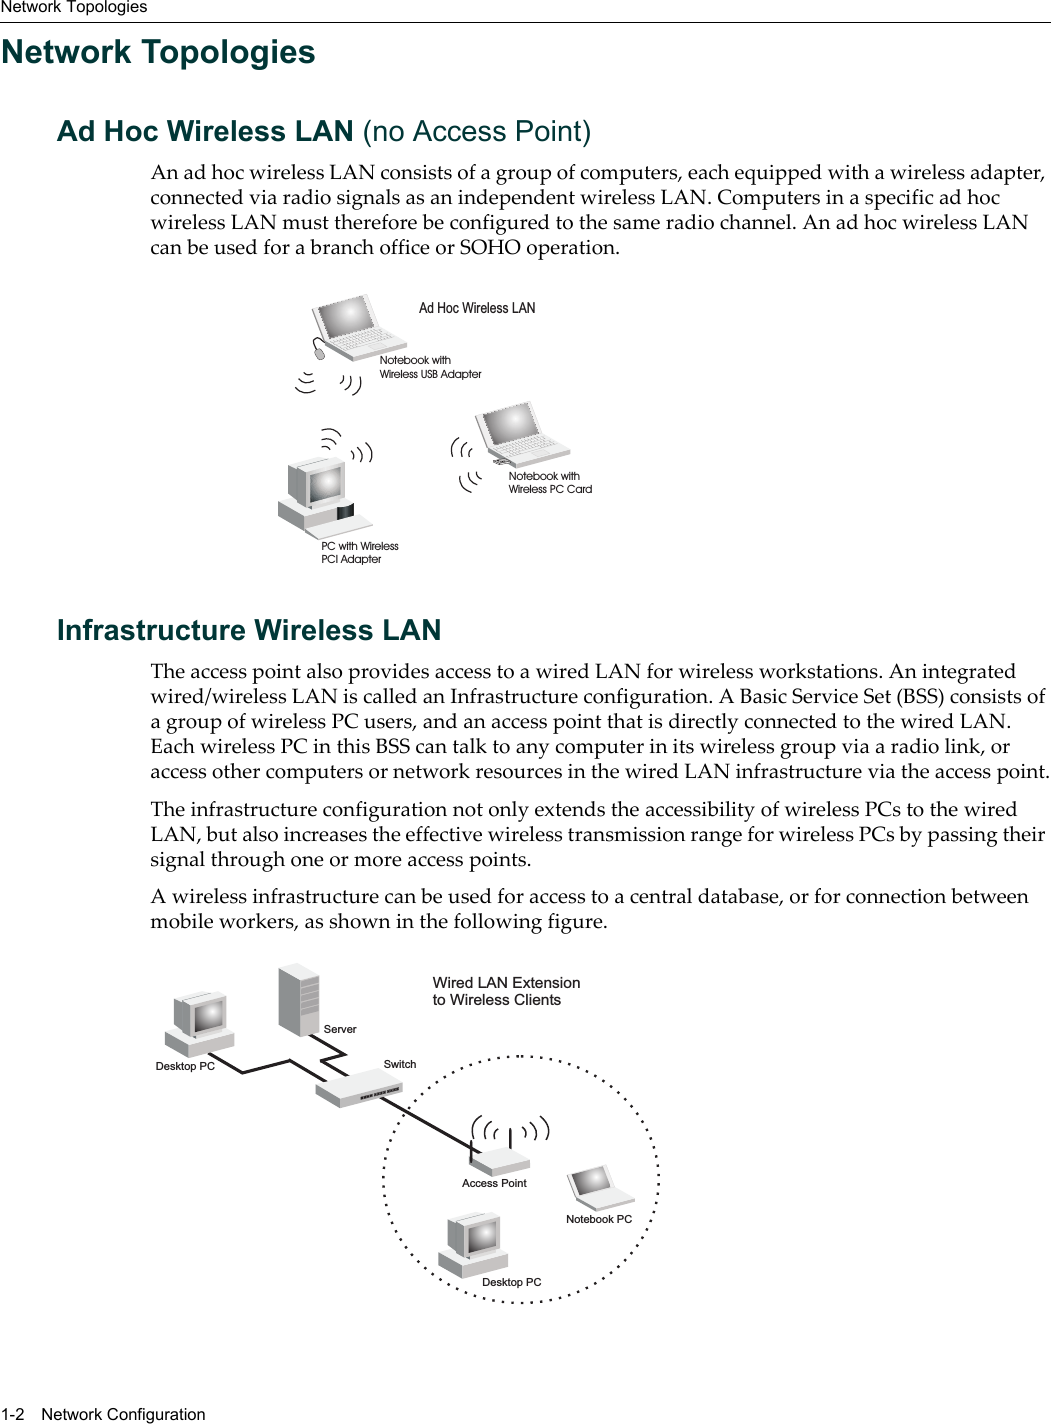 Network Topologies1-2 Network ConfigurationNetwork TopologiesAd Hoc Wireless LAN (no Access Point)AnadhocwirelessLANconsistsofagroupofcomputers,eachequippedwithawirelessadapter,connectedviaradiosignalsasanindependentwirelessLAN.ComputersinaspecificadhocwirelessLANmustthereforebeconfiguredtothesameradiochannel.AnadhocwirelessLANcanbeusedforabranchofficeorSOHOoperation.Infrastructure Wireless LANTheaccesspointalsoprovidesaccesstoawiredLANforwirelessworkstations.Anintegratedwired/wirelessLANiscalledanInfrastructureconfiguration.ABasicServiceSet(BSS)consistsofagroupofwirelessPCusers,andanaccesspointthatisdirectlyconnectedtothewiredLAN.EachwirelessPCinthisBSScantalktoanycomputerinitswirelessgroupviaaradiolink,oraccessothercomputersornetworkresourcesinthewiredLANinfrastructureviatheaccesspoint.TheinfrastructureconfigurationnotonlyextendstheaccessibilityofwirelessPCstothewiredLAN,butalsoincreasestheeffectivewirelesstransmissionrangeforwirelessPCsbypassingtheirsignalthroughoneormoreaccesspoints.Awirelessinfrastructurecanbeusedforaccesstoacentraldatabase,orforconnectionbetweenmobileworkers,asshowninthefollowingfigure.Ad Hoc Wireless LANNotebook withWireless USB AdapterNotebook withWireless PC CardPC with WirelessPCI AdapterServerSwitchDesktop PCAccess PointWired LAN Extensionto Wireless ClientsDesktop PCNotebook PC